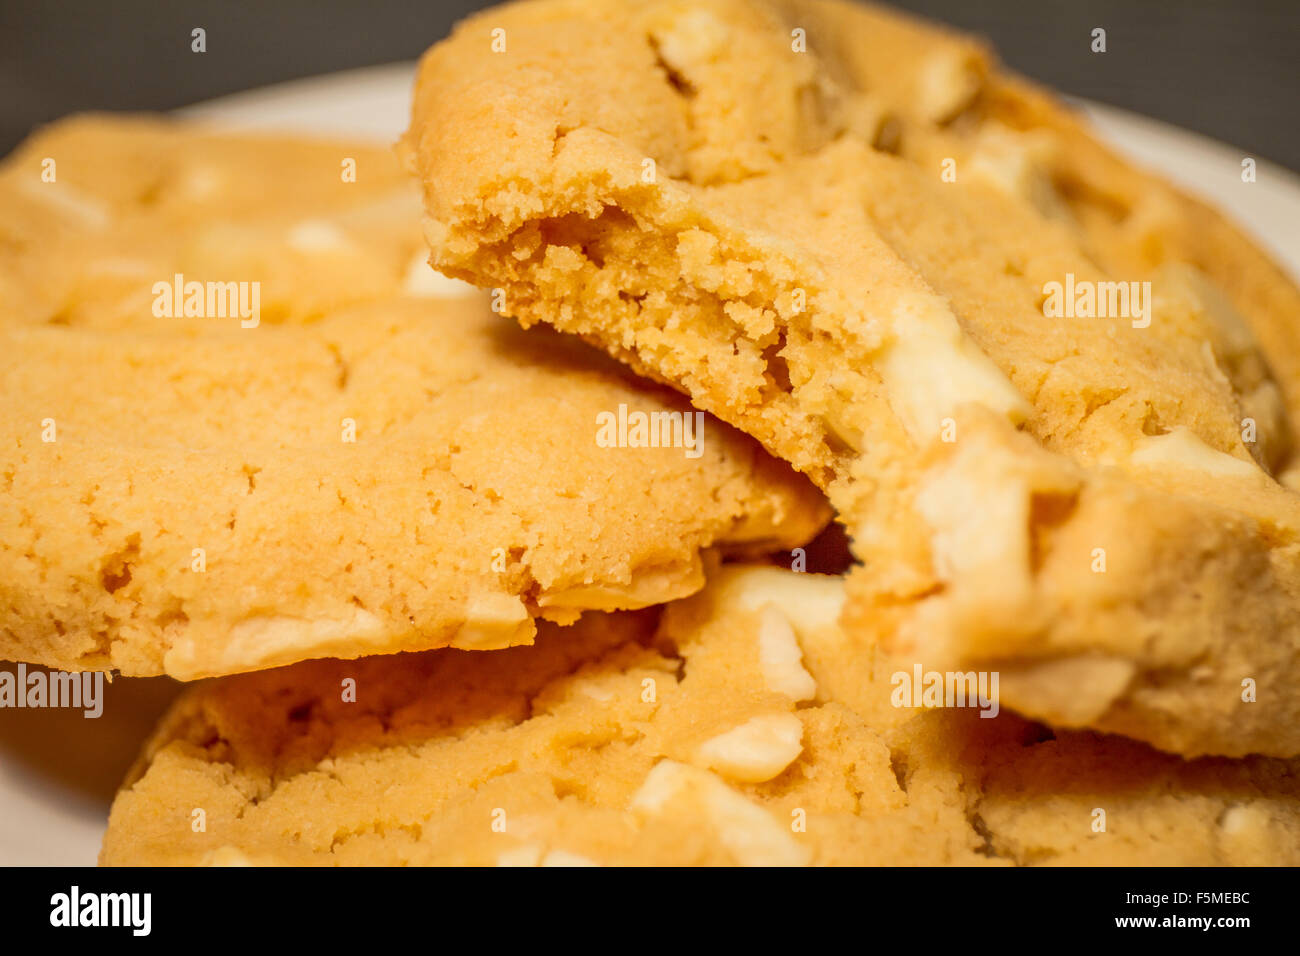 A close-up of three white chocolate chip macadamia nut cookies on a white plate with a bite taken out of one. Stock Photo